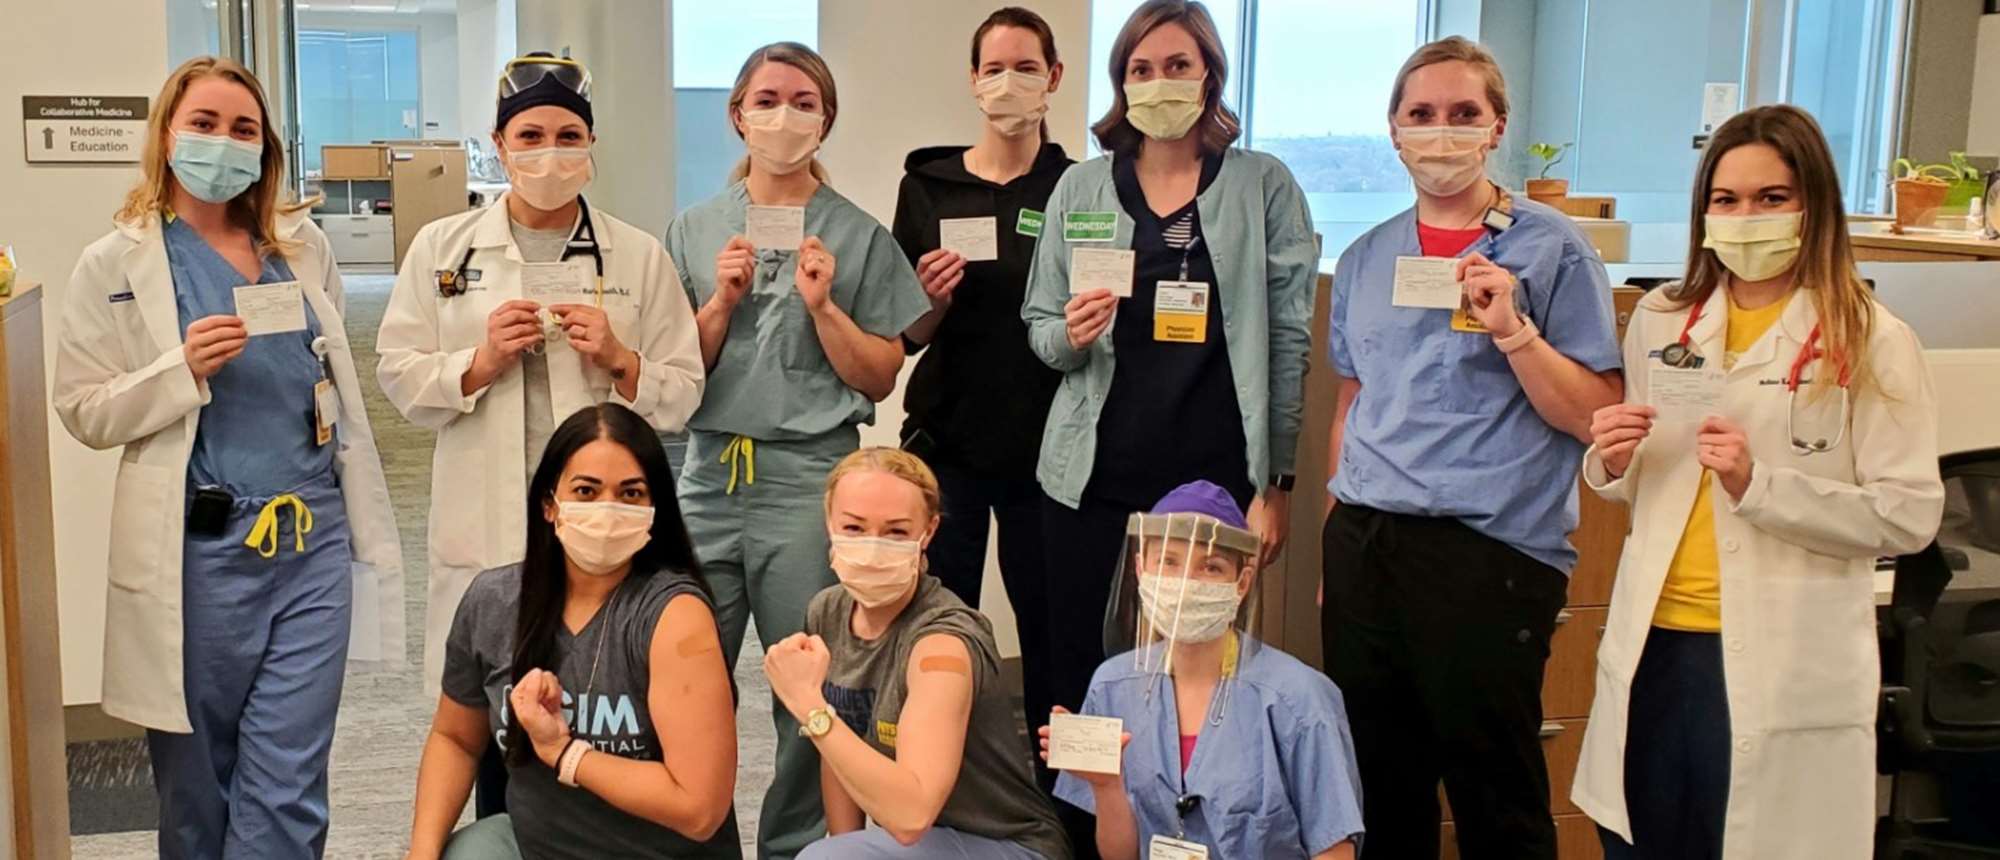 MCW Hospitalists Step up to COVID-19 Challenges